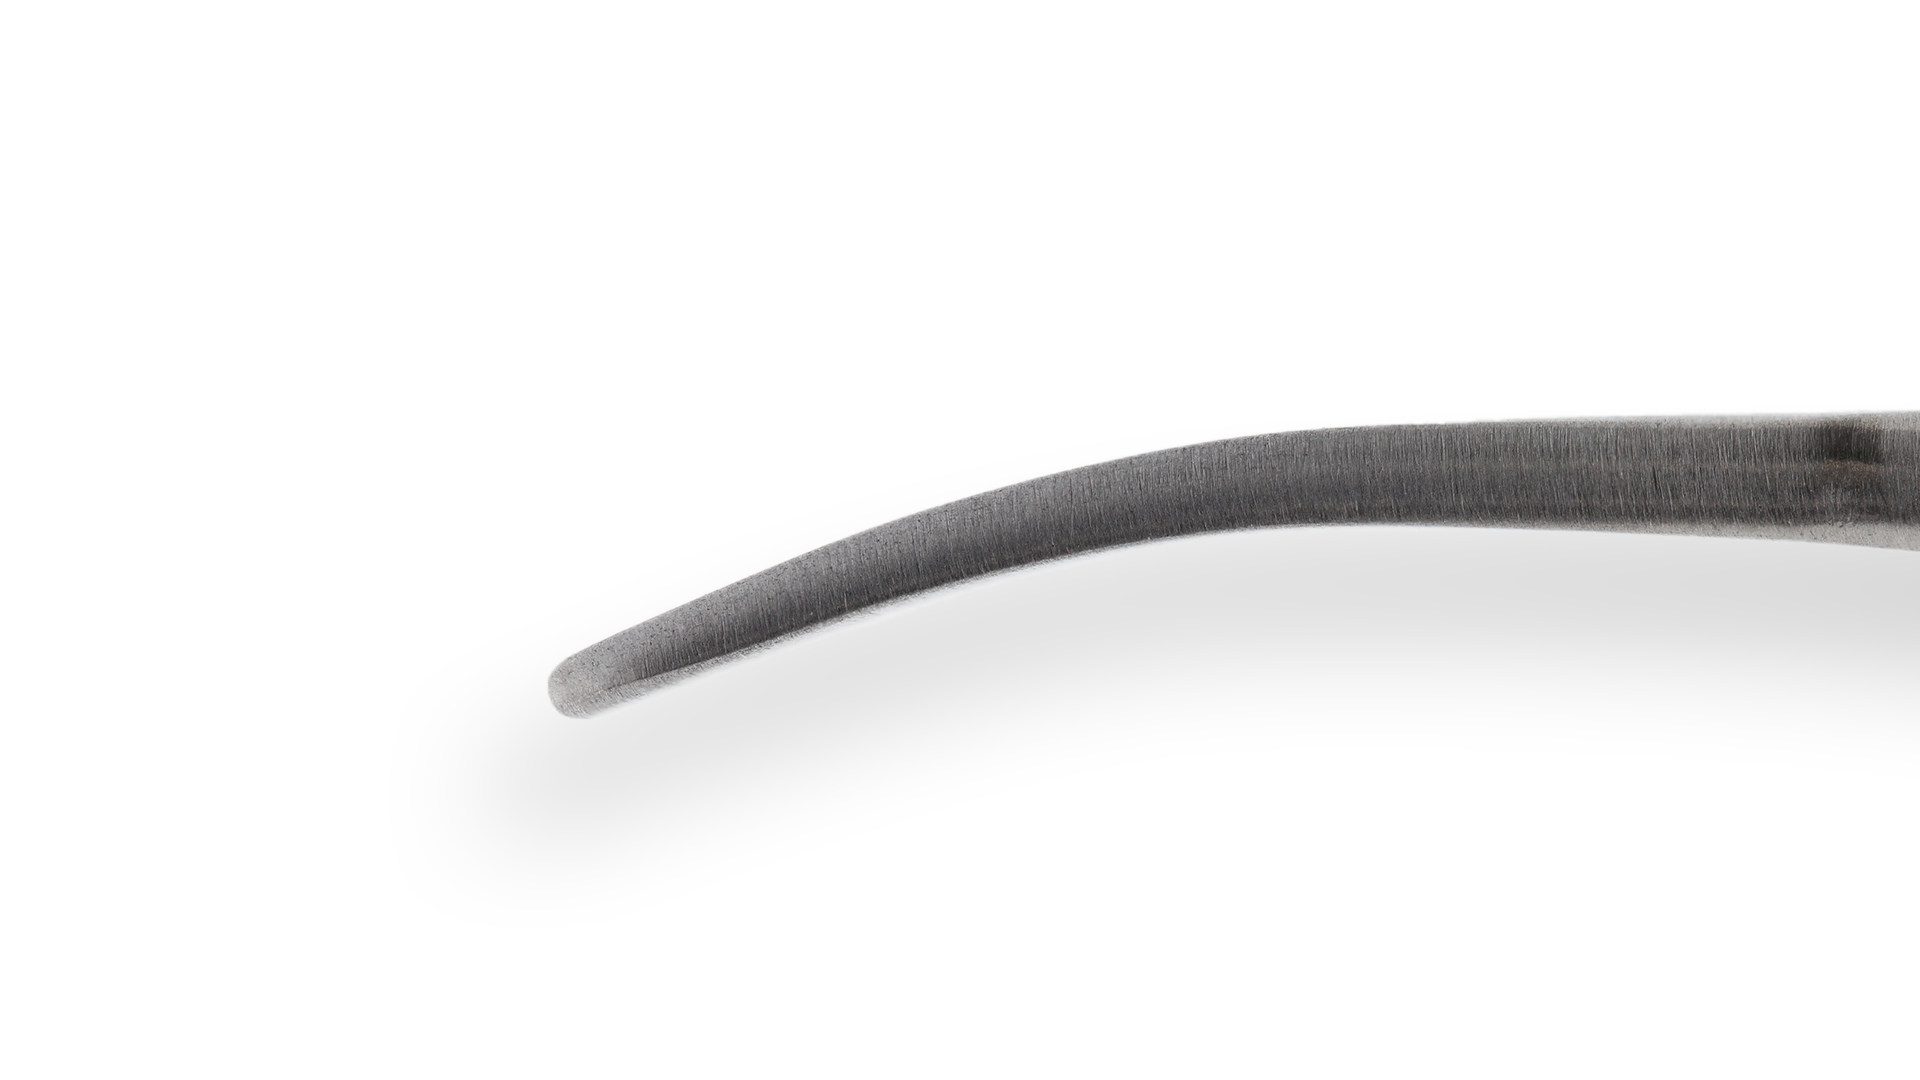 Penfield Dissector #4 - Slightly Curved 3mm Blunt Dissector